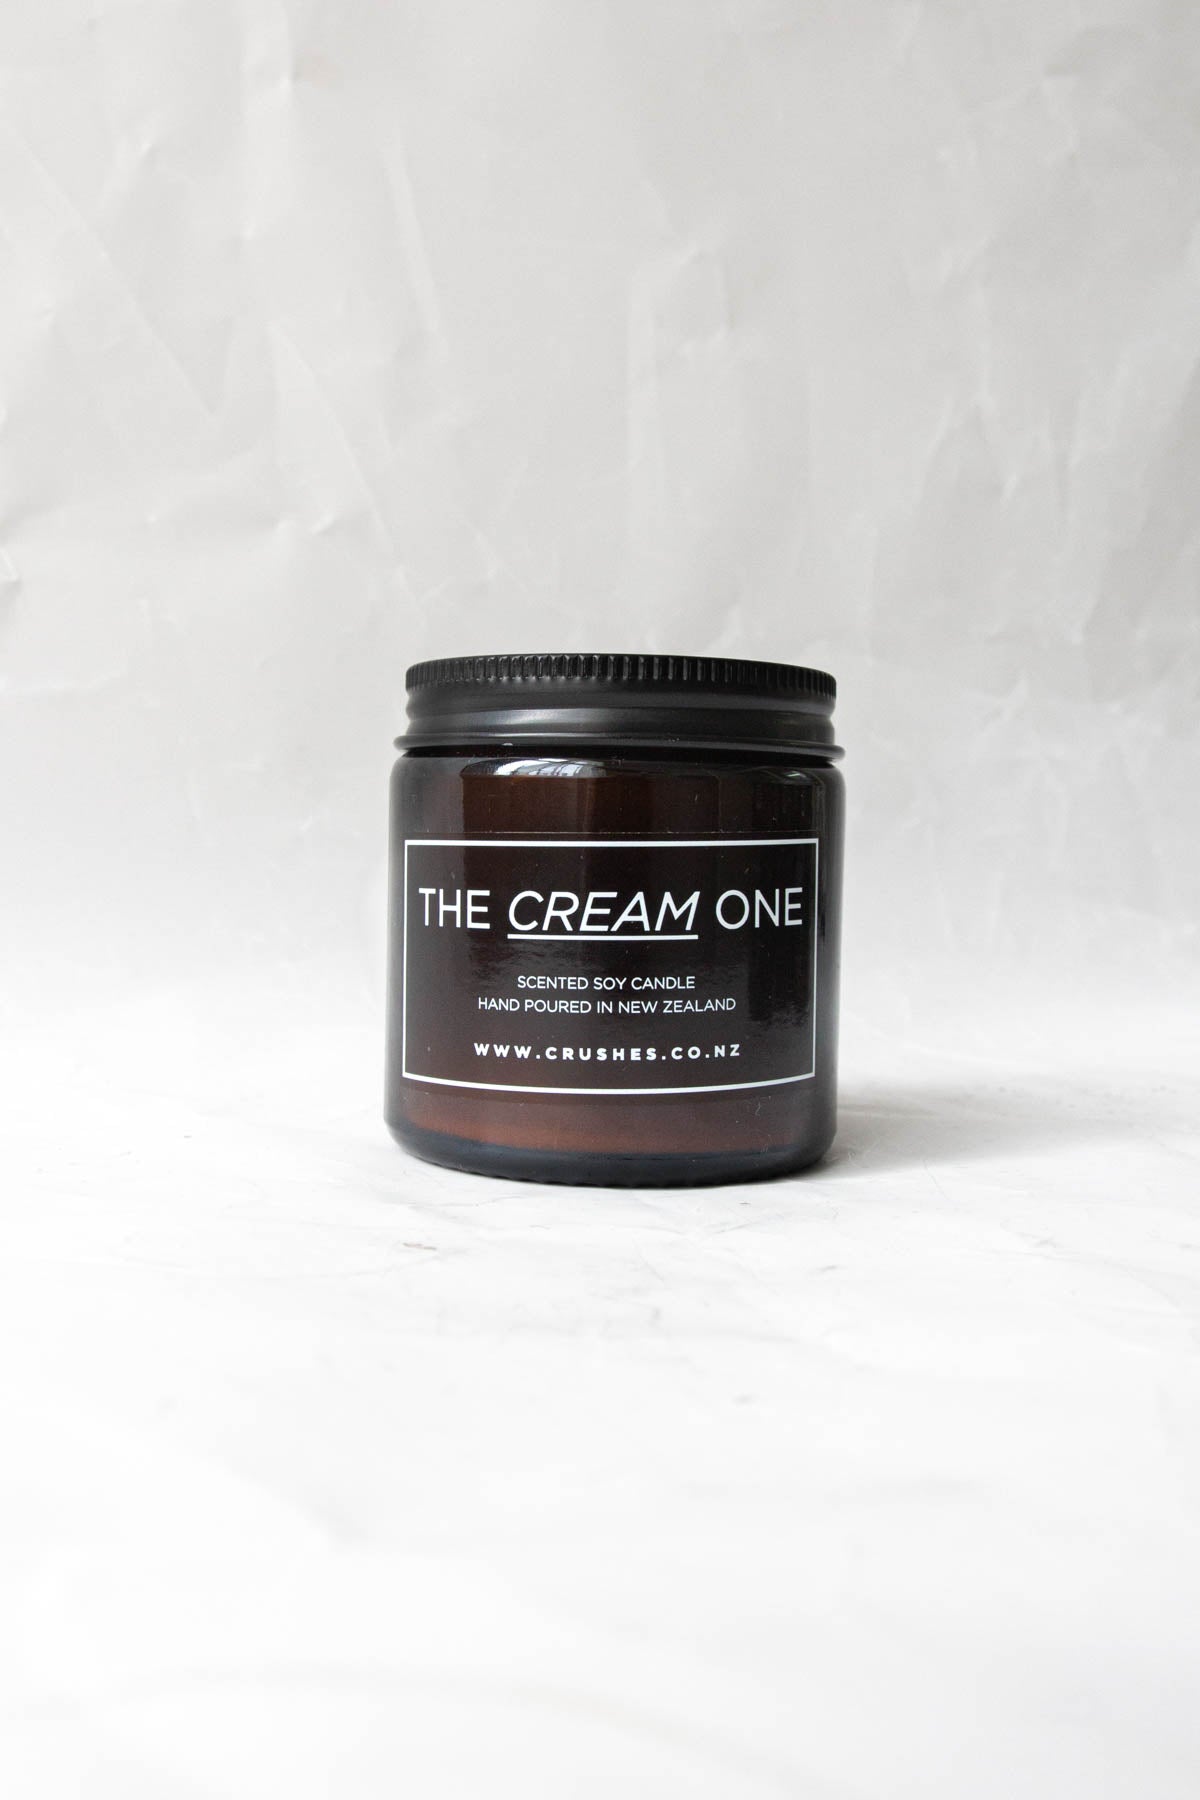 The Cream One - Scented Soy Candle